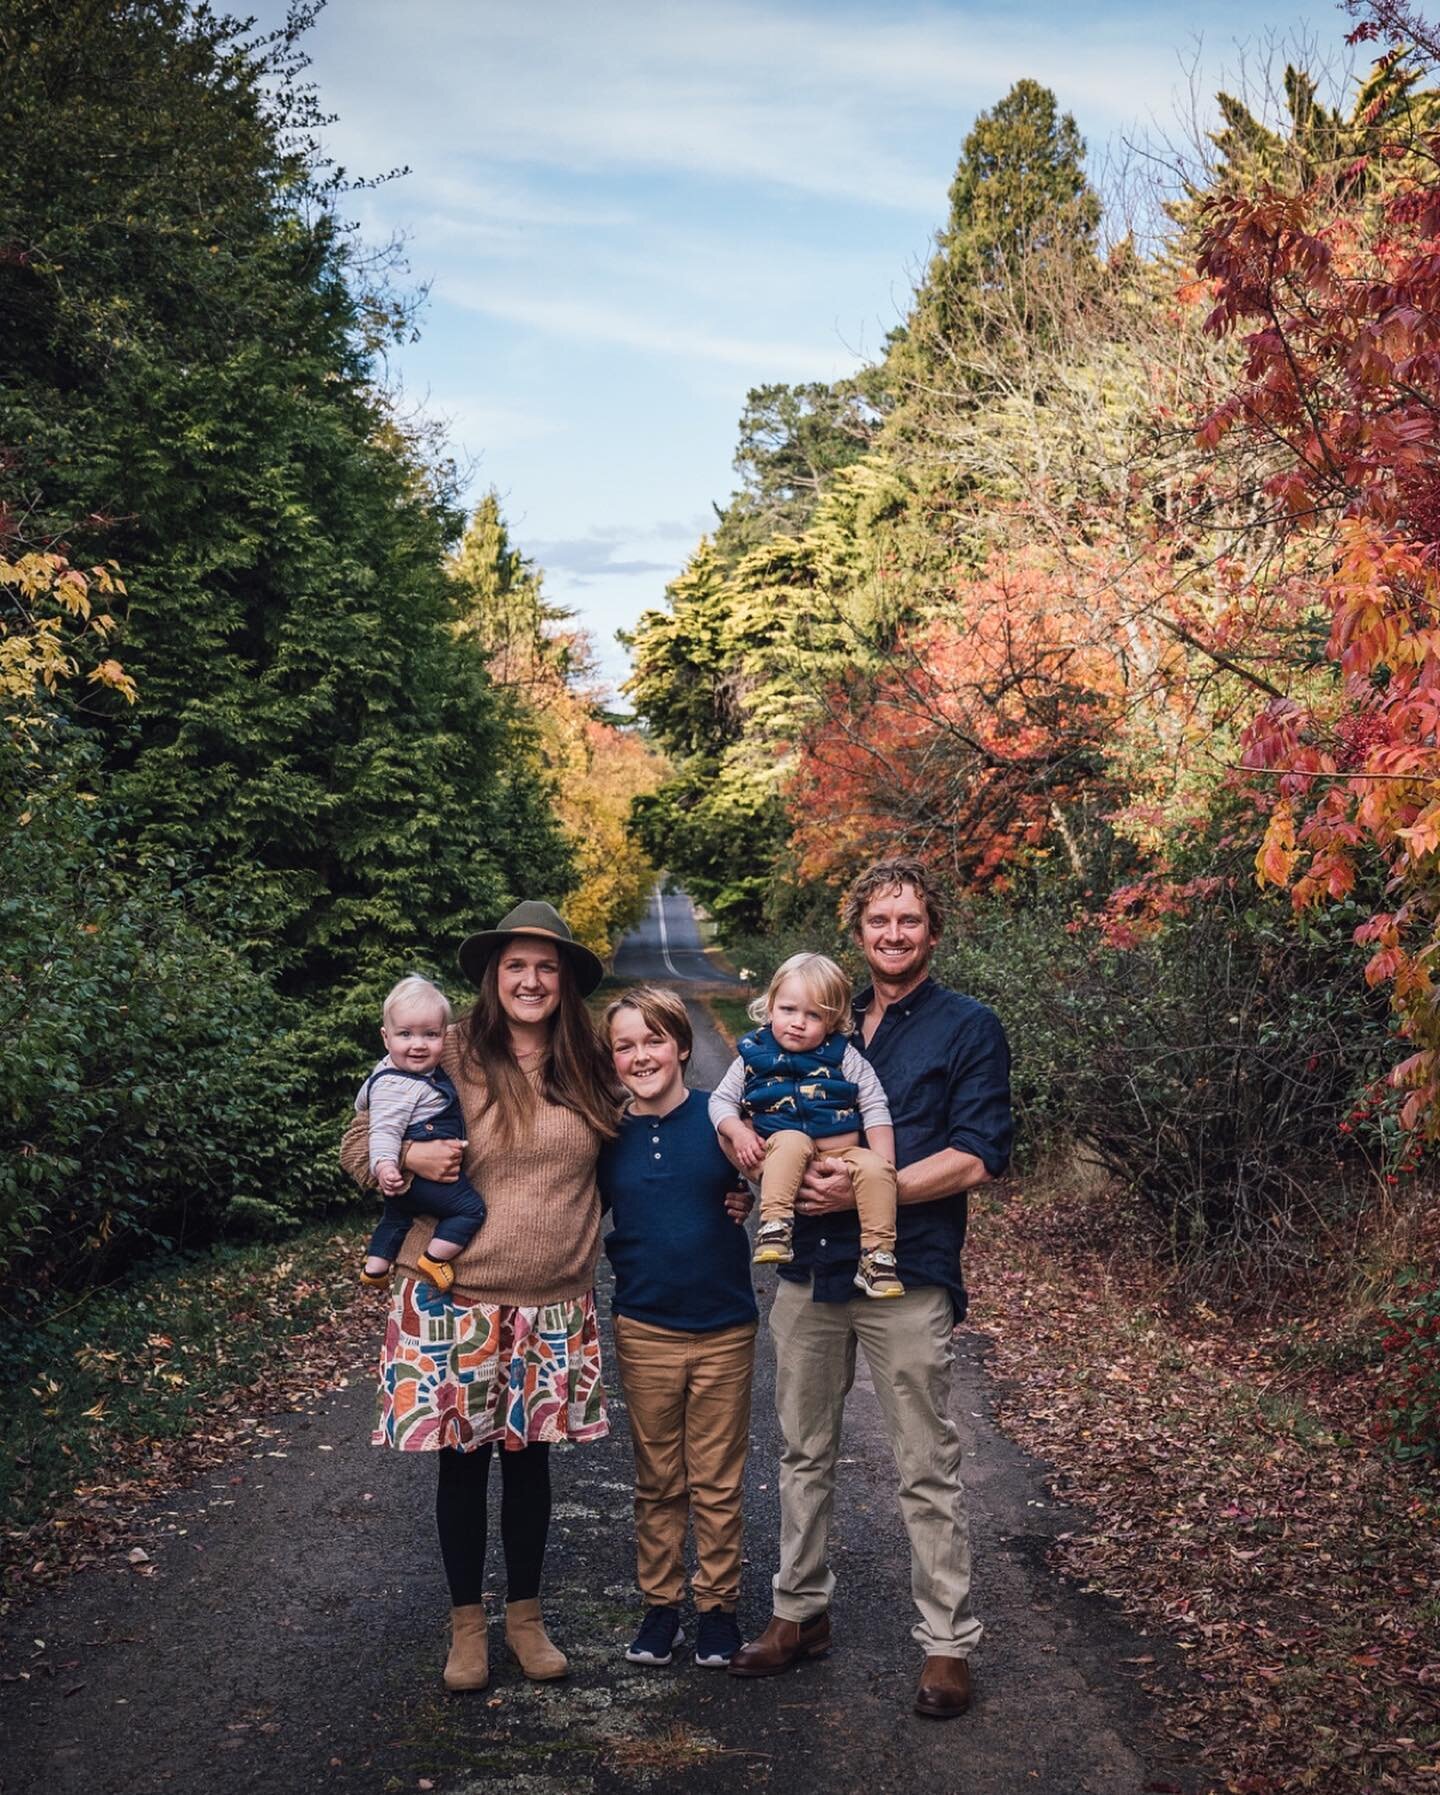 Another year in Orange capturing the Magic of Autumn 🍂✨ 

These adorable little explorers brought enchantment to every frame!! 

Thanks to the families who booked me to make autumn magic amidst the sprawling ivy and vibrant red-gold leaves of Campbe